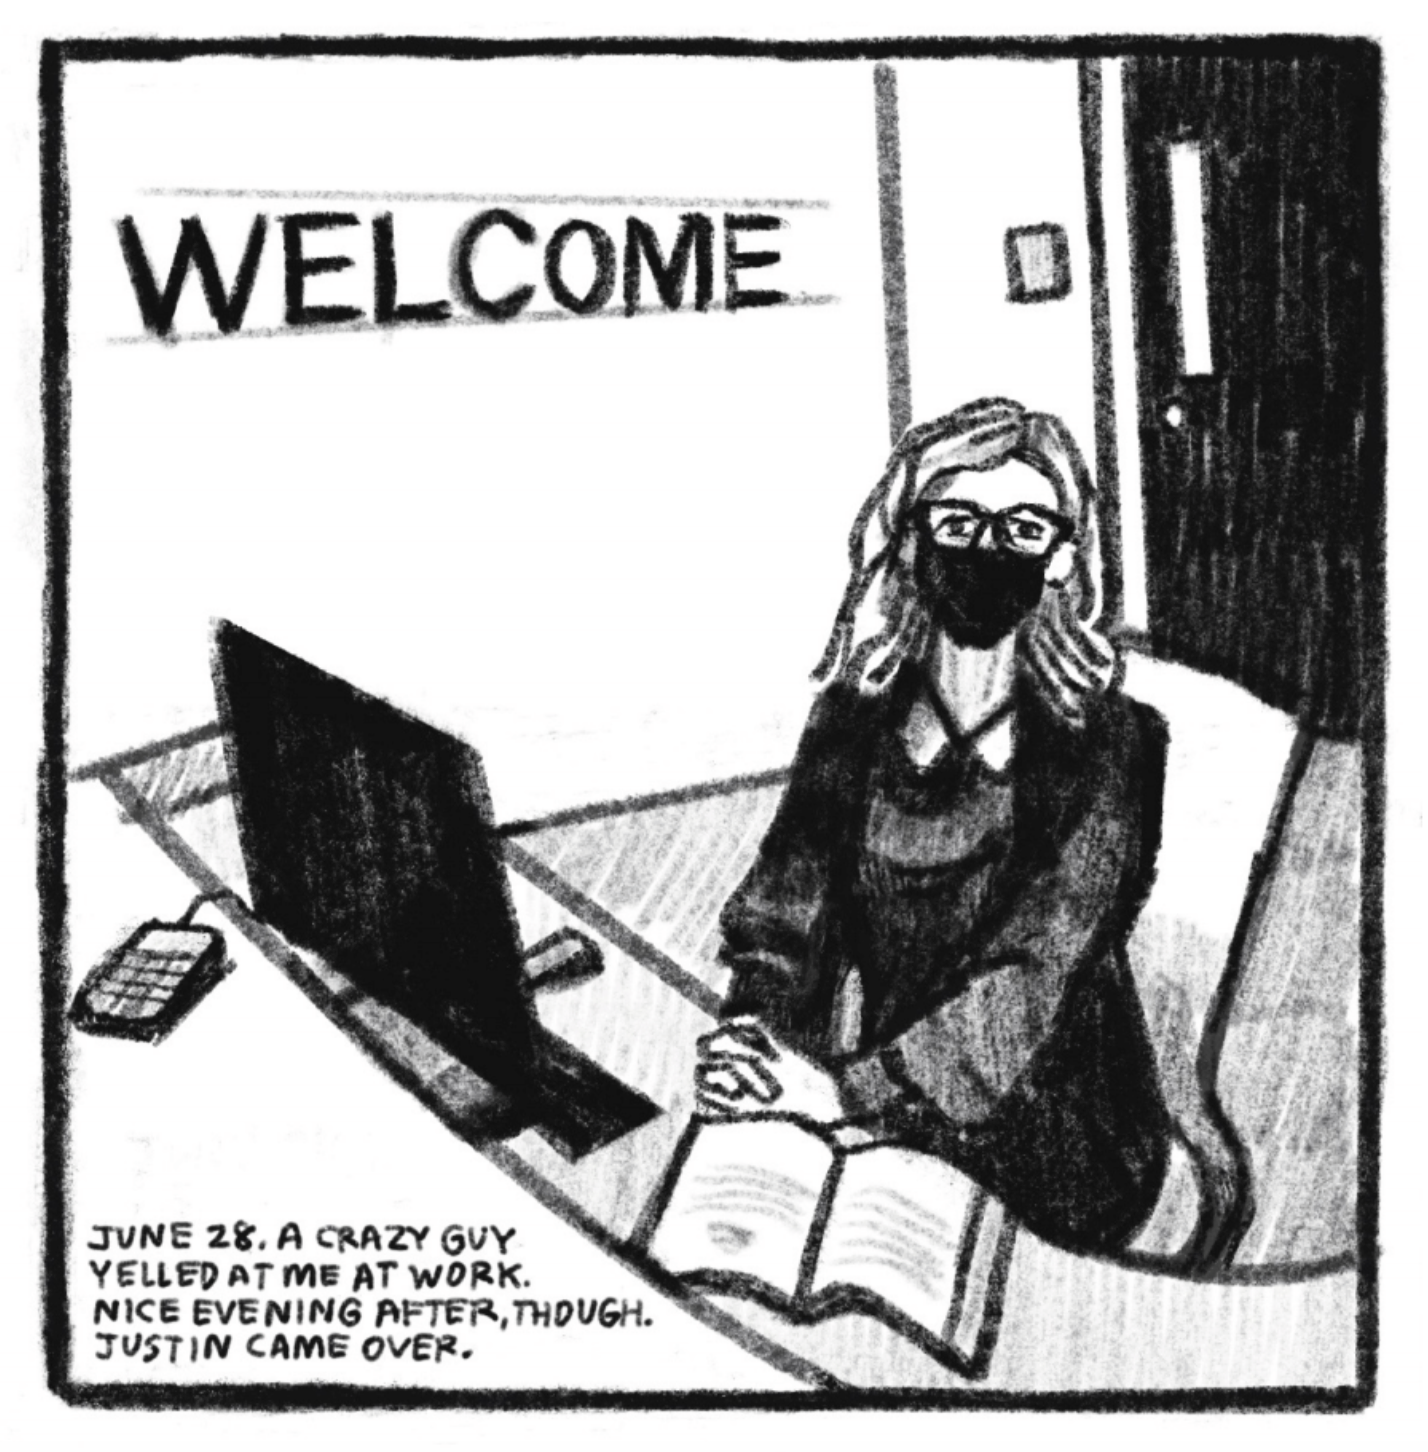 3. Kim sits behind the front desk at her job. In the background is a wall with large letters that read â€œWELCOME.â€ She is wearing glasses, a face mask, and a black shirt/dress with a white collar. On the desk in front of her are a desktop computer and an open book. She holds her hands together on top of the desk, sitting up straight and looking right at the reader, stiff and polite. â€œJune 28. A crazy guy yelled at me at work. Nice evening after, though. Justin came over.â€